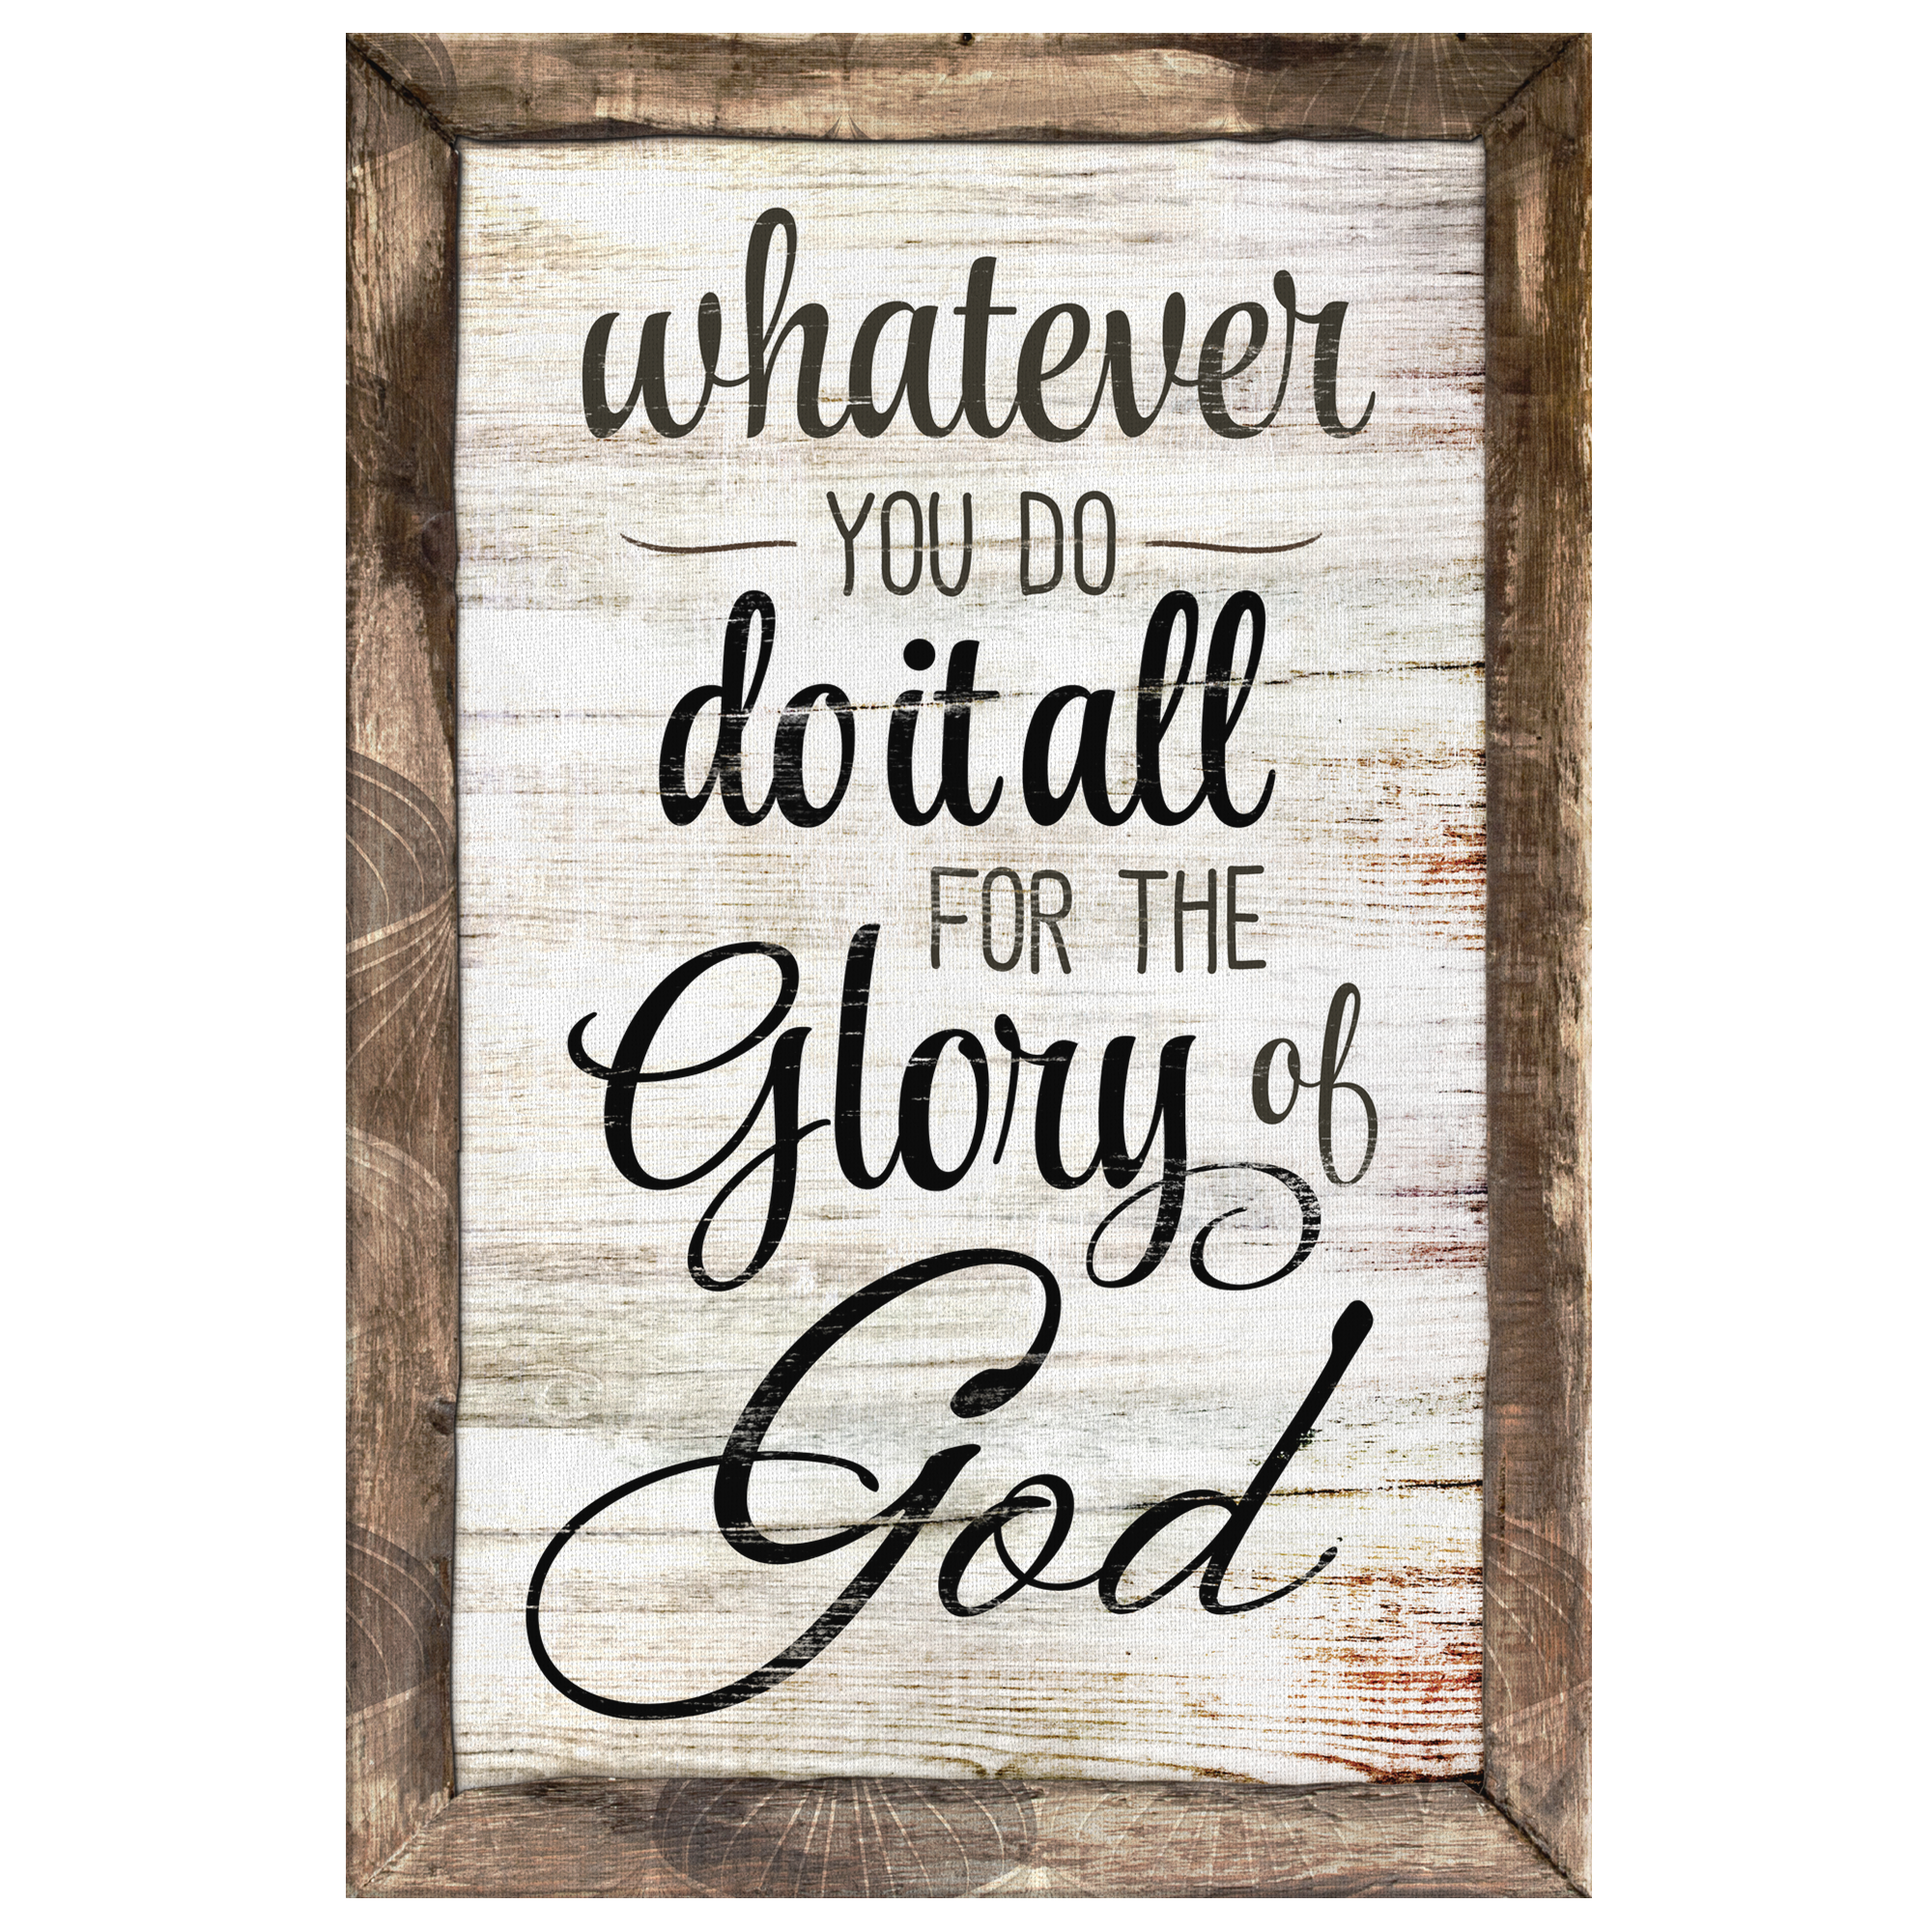 "Do It All For The Glory Of God" Premium Canvas Wall Art